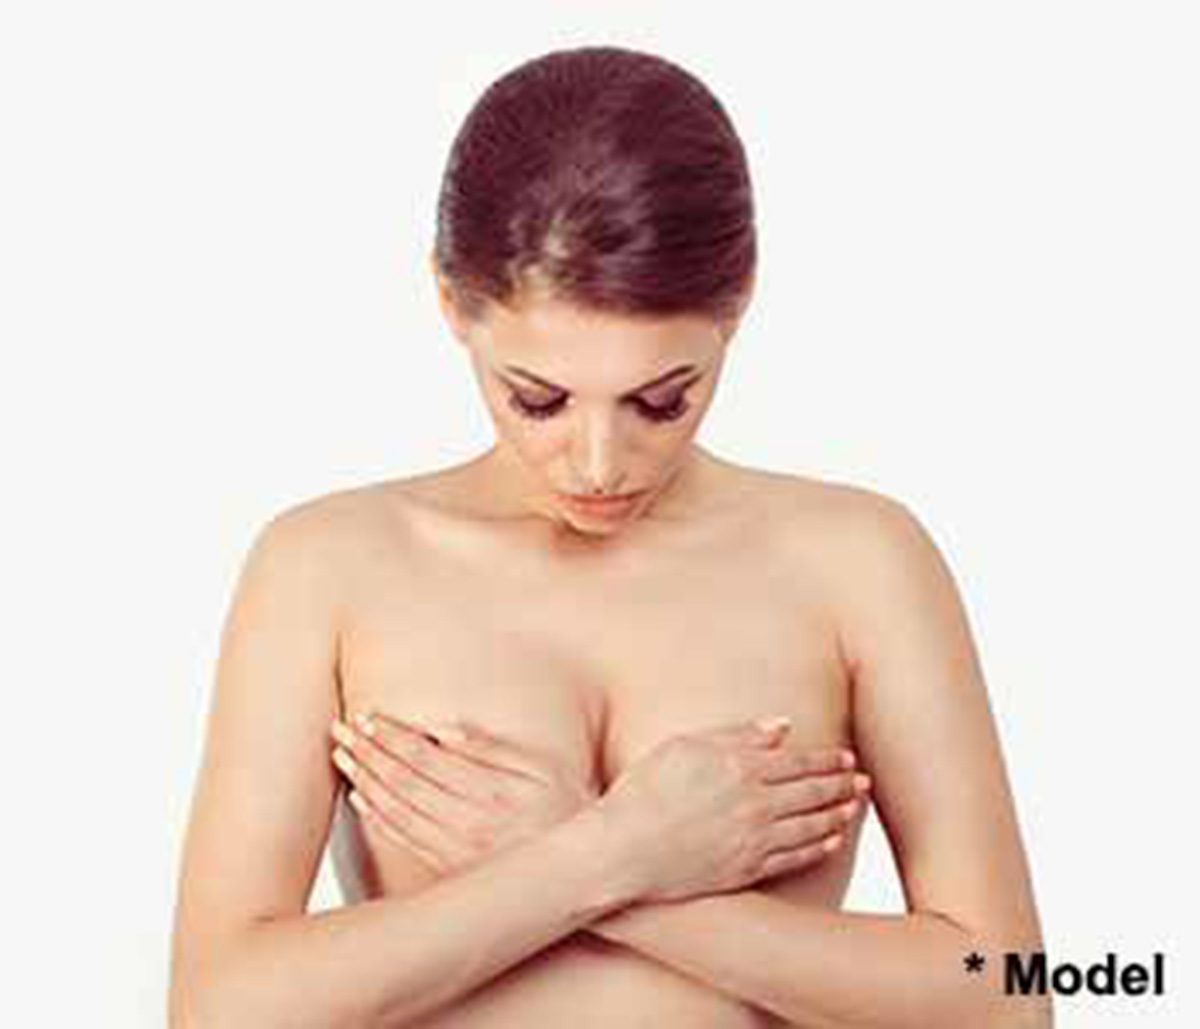 Breast augmentation involves the placement of breast implants to enhance and improve the shape and size of your breasts.